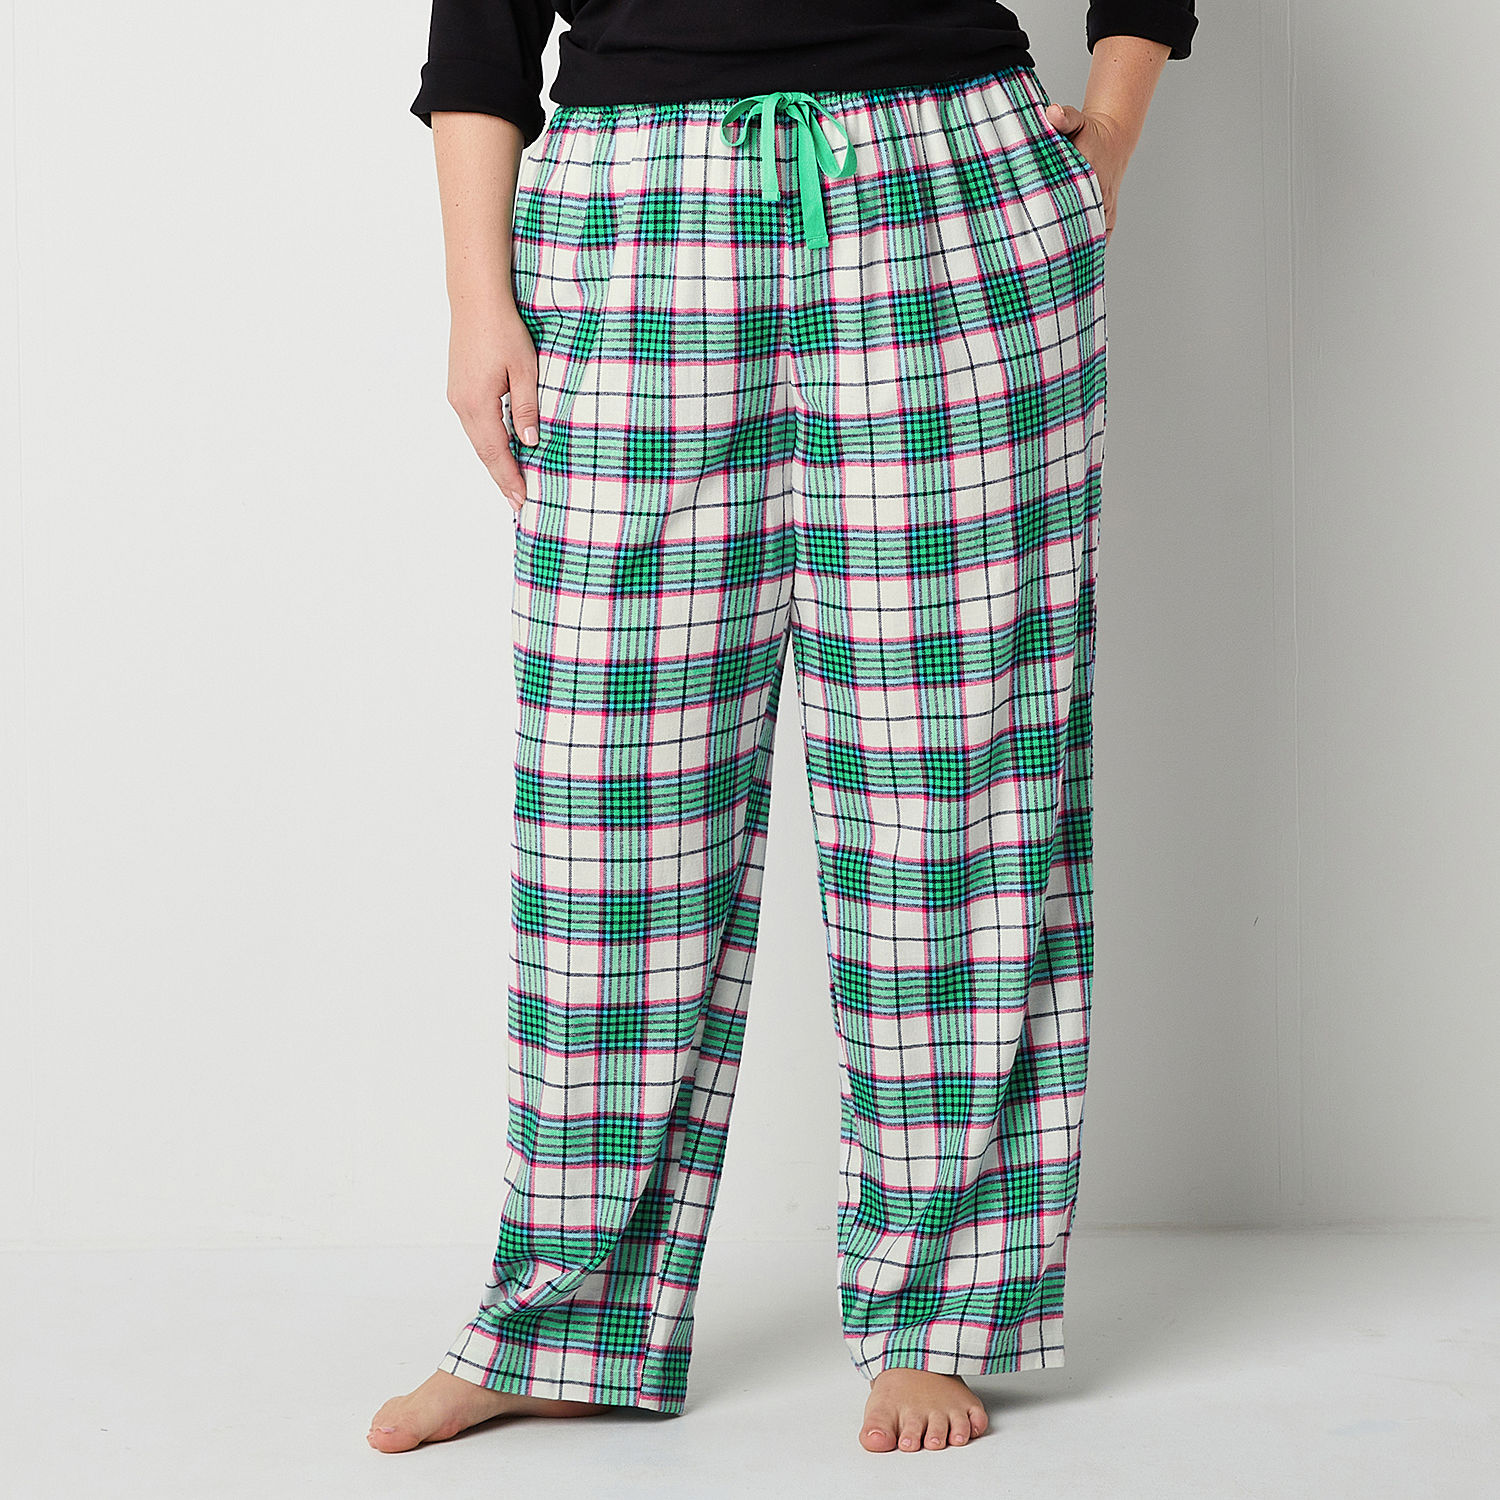 Sleep Chic Womens Plus Pajama Flannel Pants - JCPenney